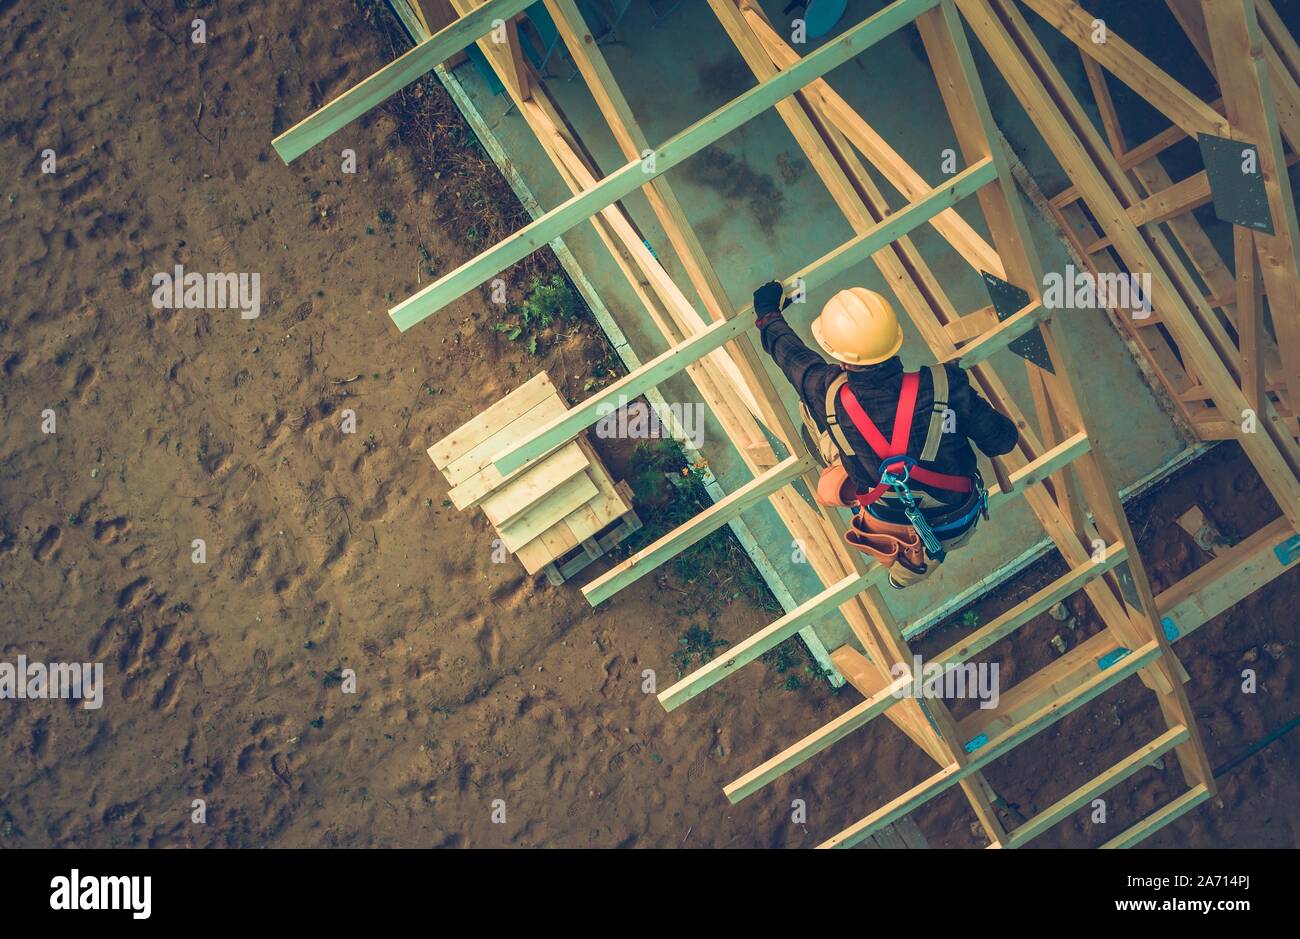 Wooden Roof Frame Building. Caucasian Roofer Working at Height. Industrial Theme. Stock Photo